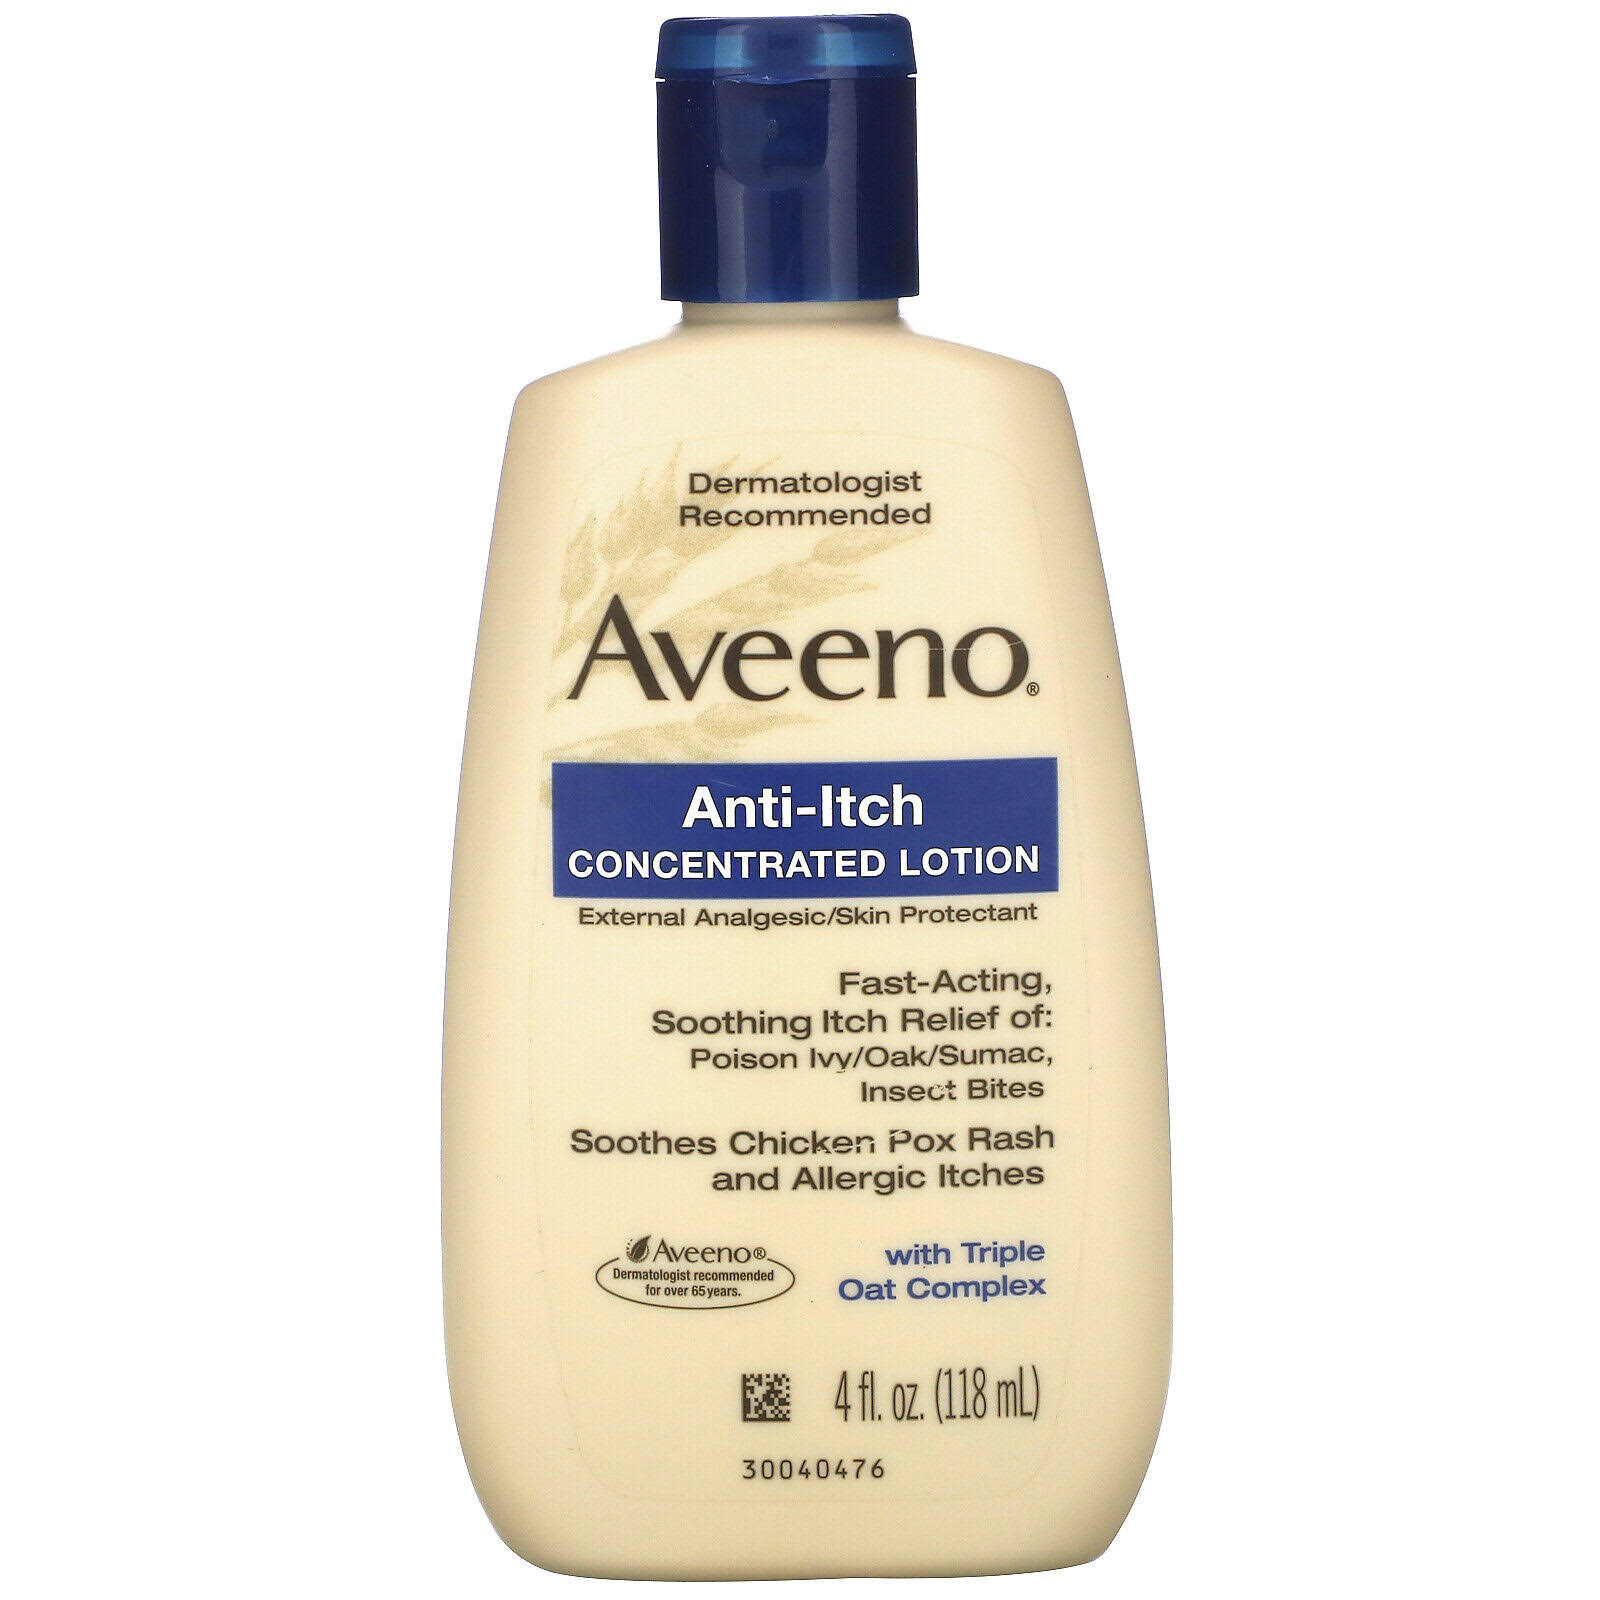 Aveeno Active Naturals Anti-Itch Concentrated Lotion - 4 oz